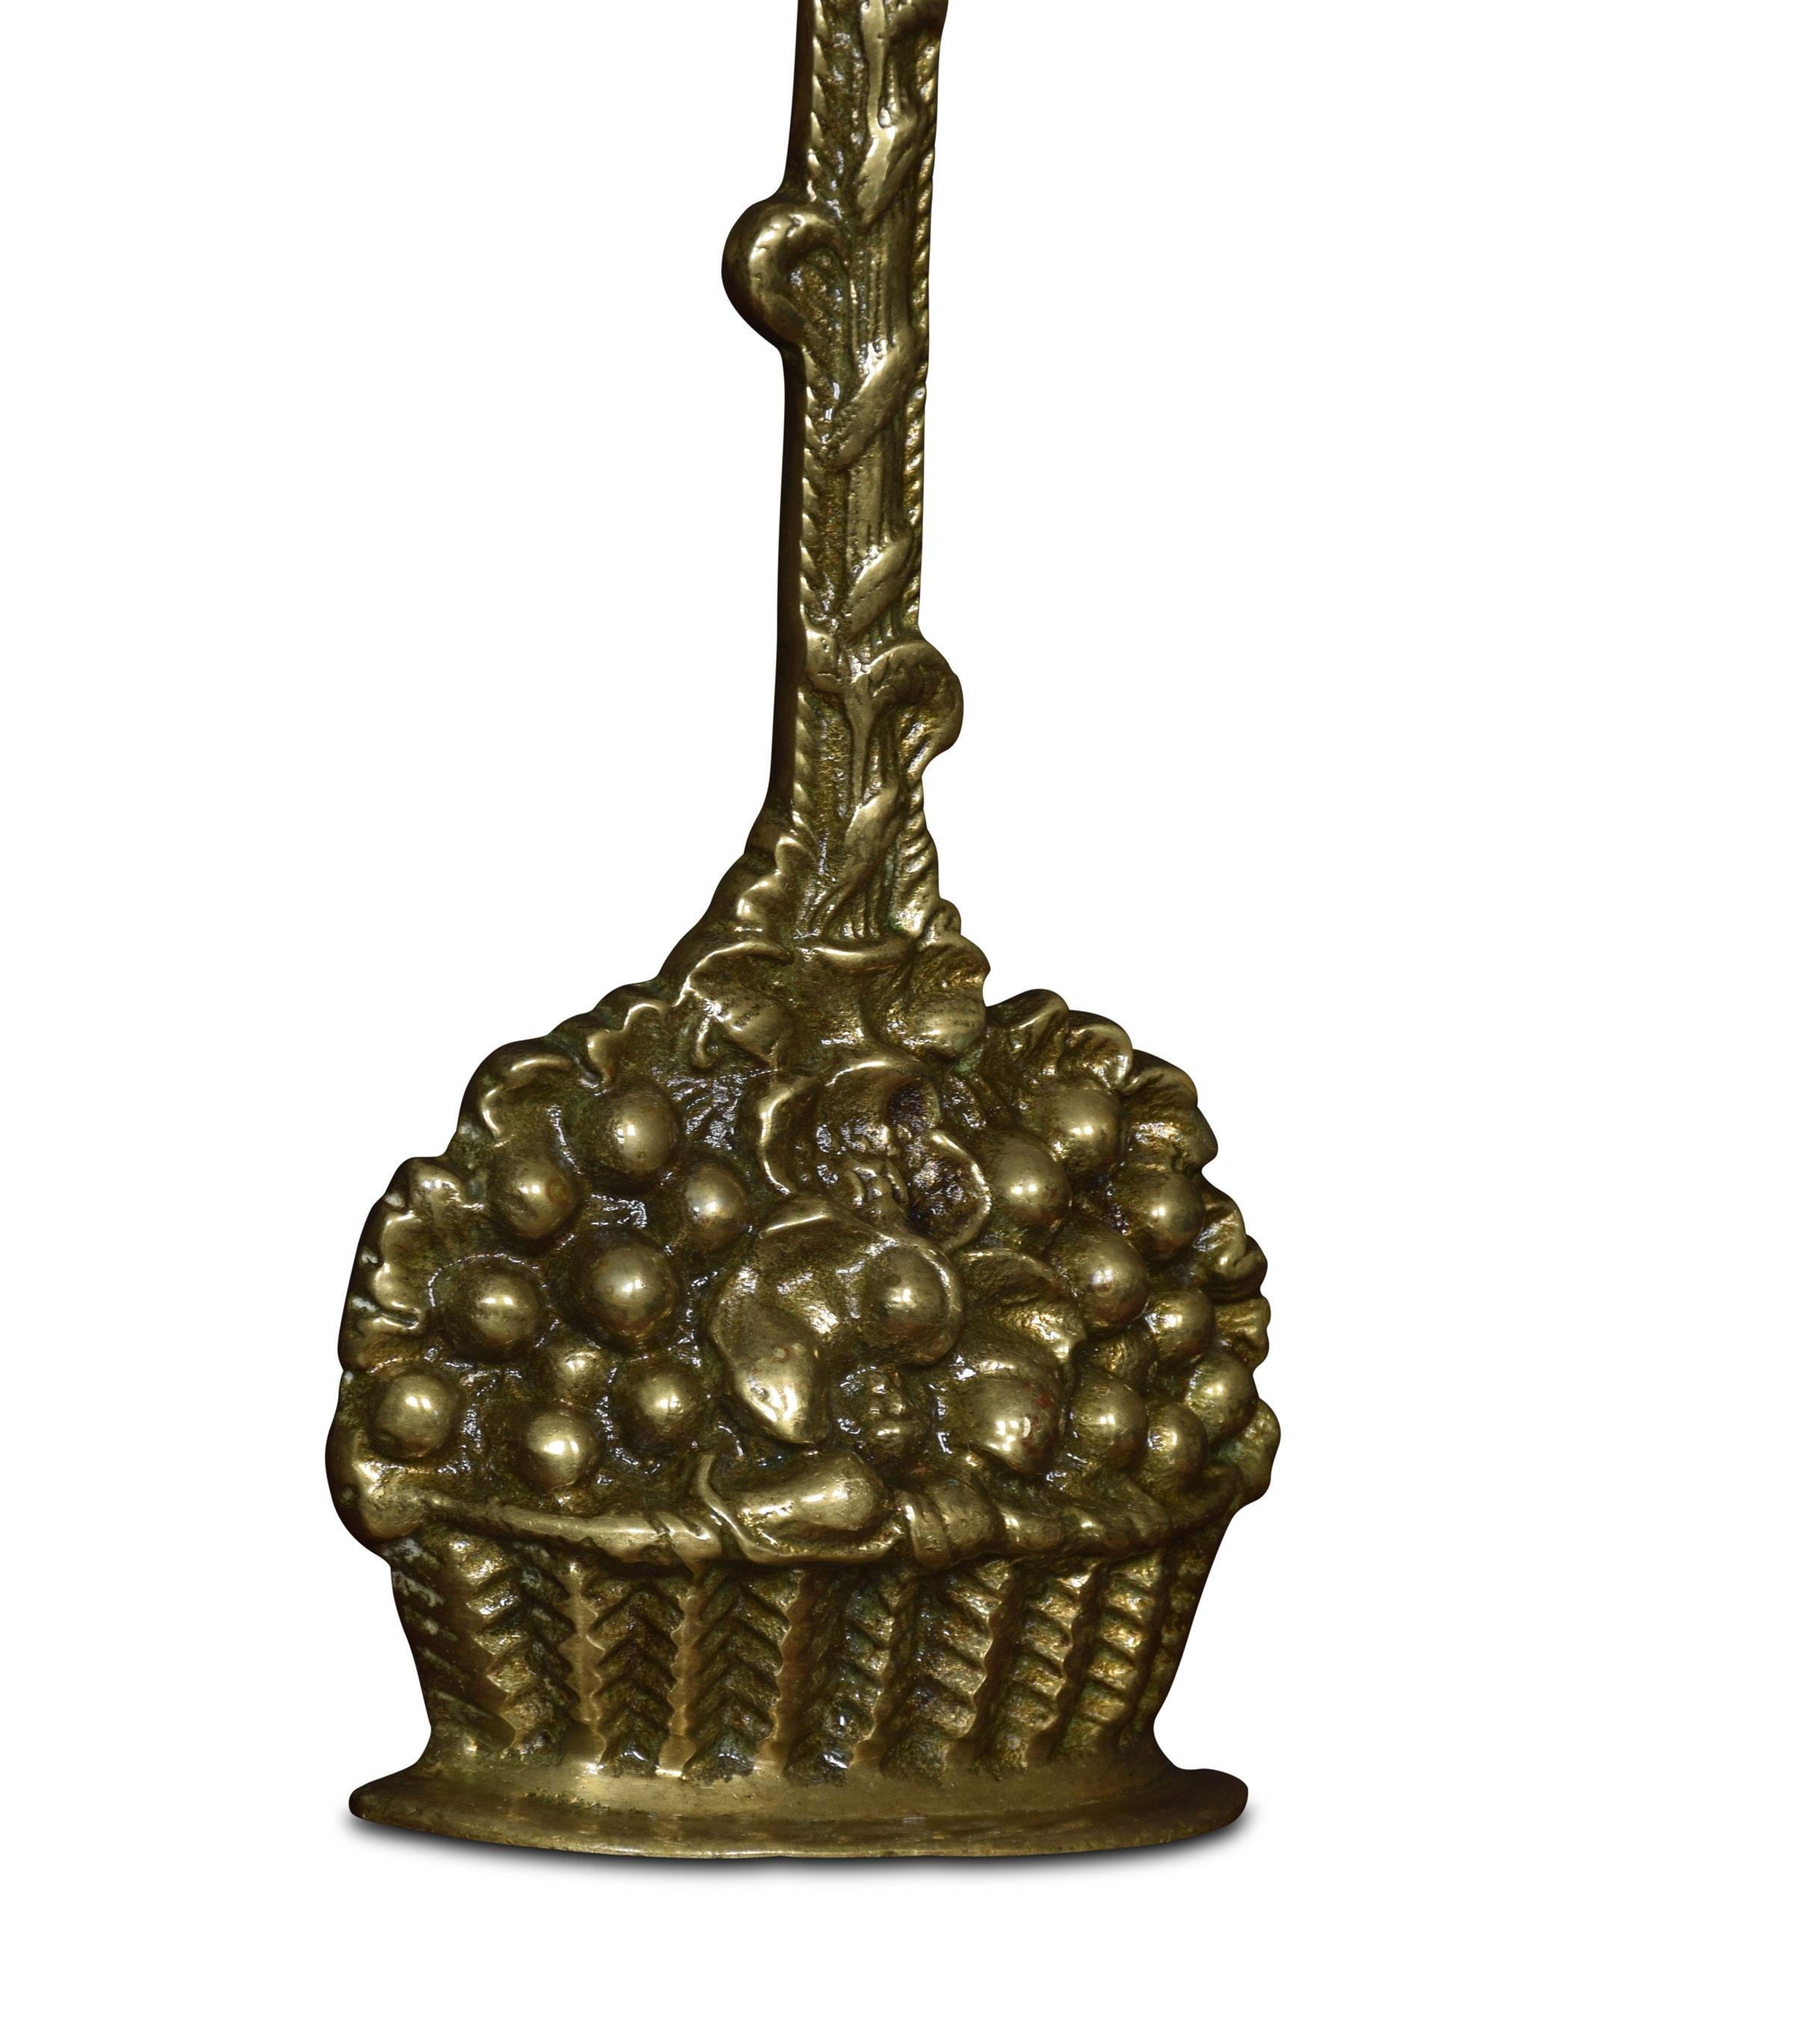 Brass doorstop in the form of a basket of fruit and flowers below a handle cast with entwined wheatears.
Dimensions
Height 14 inches
Width 6 inches
Depth 2 inches.